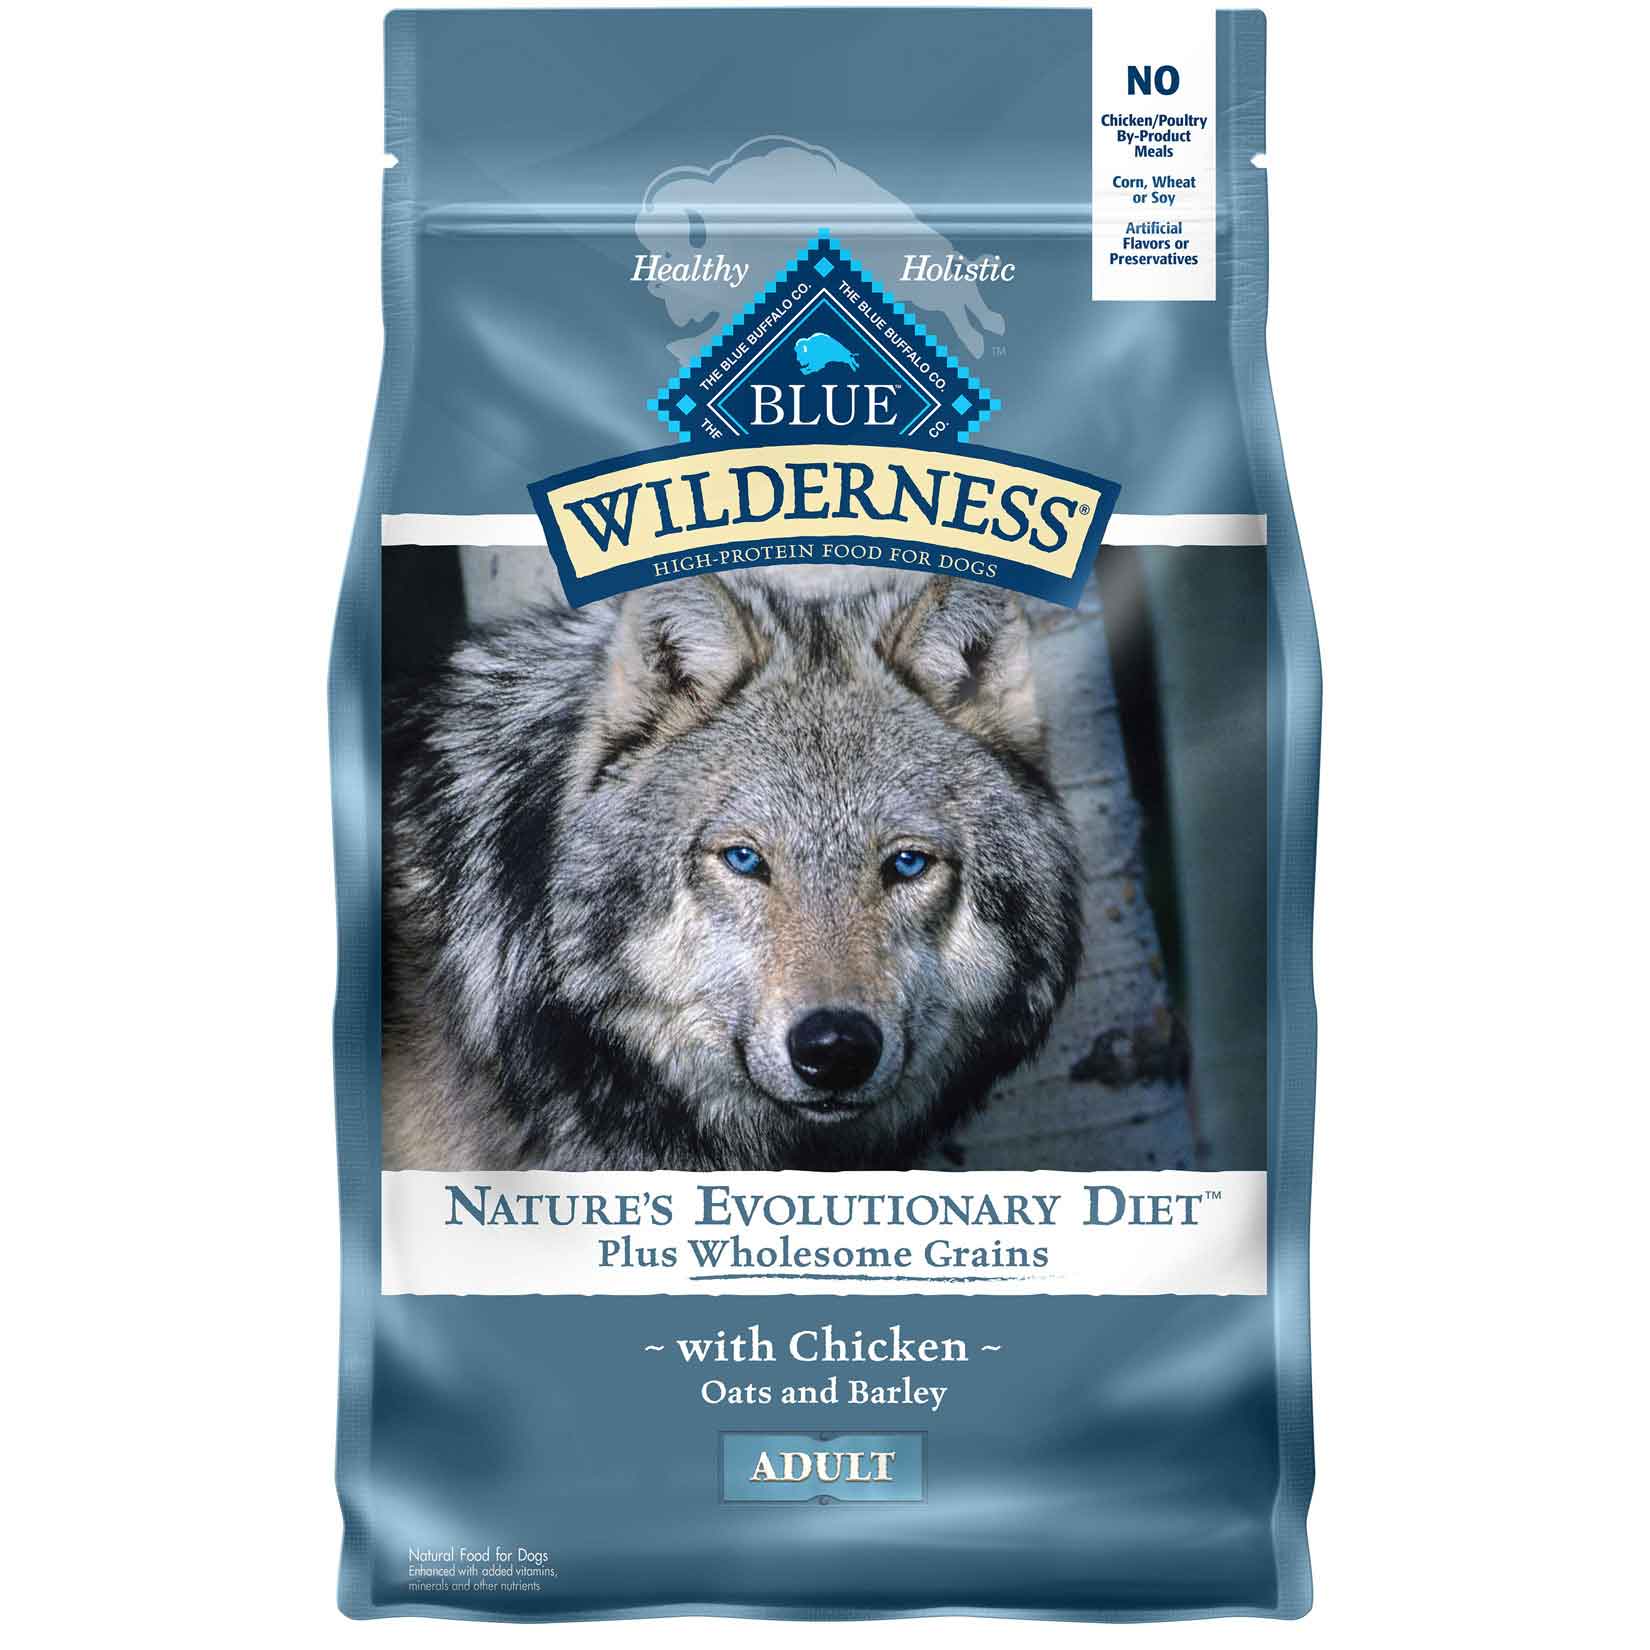 Blue Wilderness Adult Grain/Chicken Dry Dog Food, 4.5 Pounds